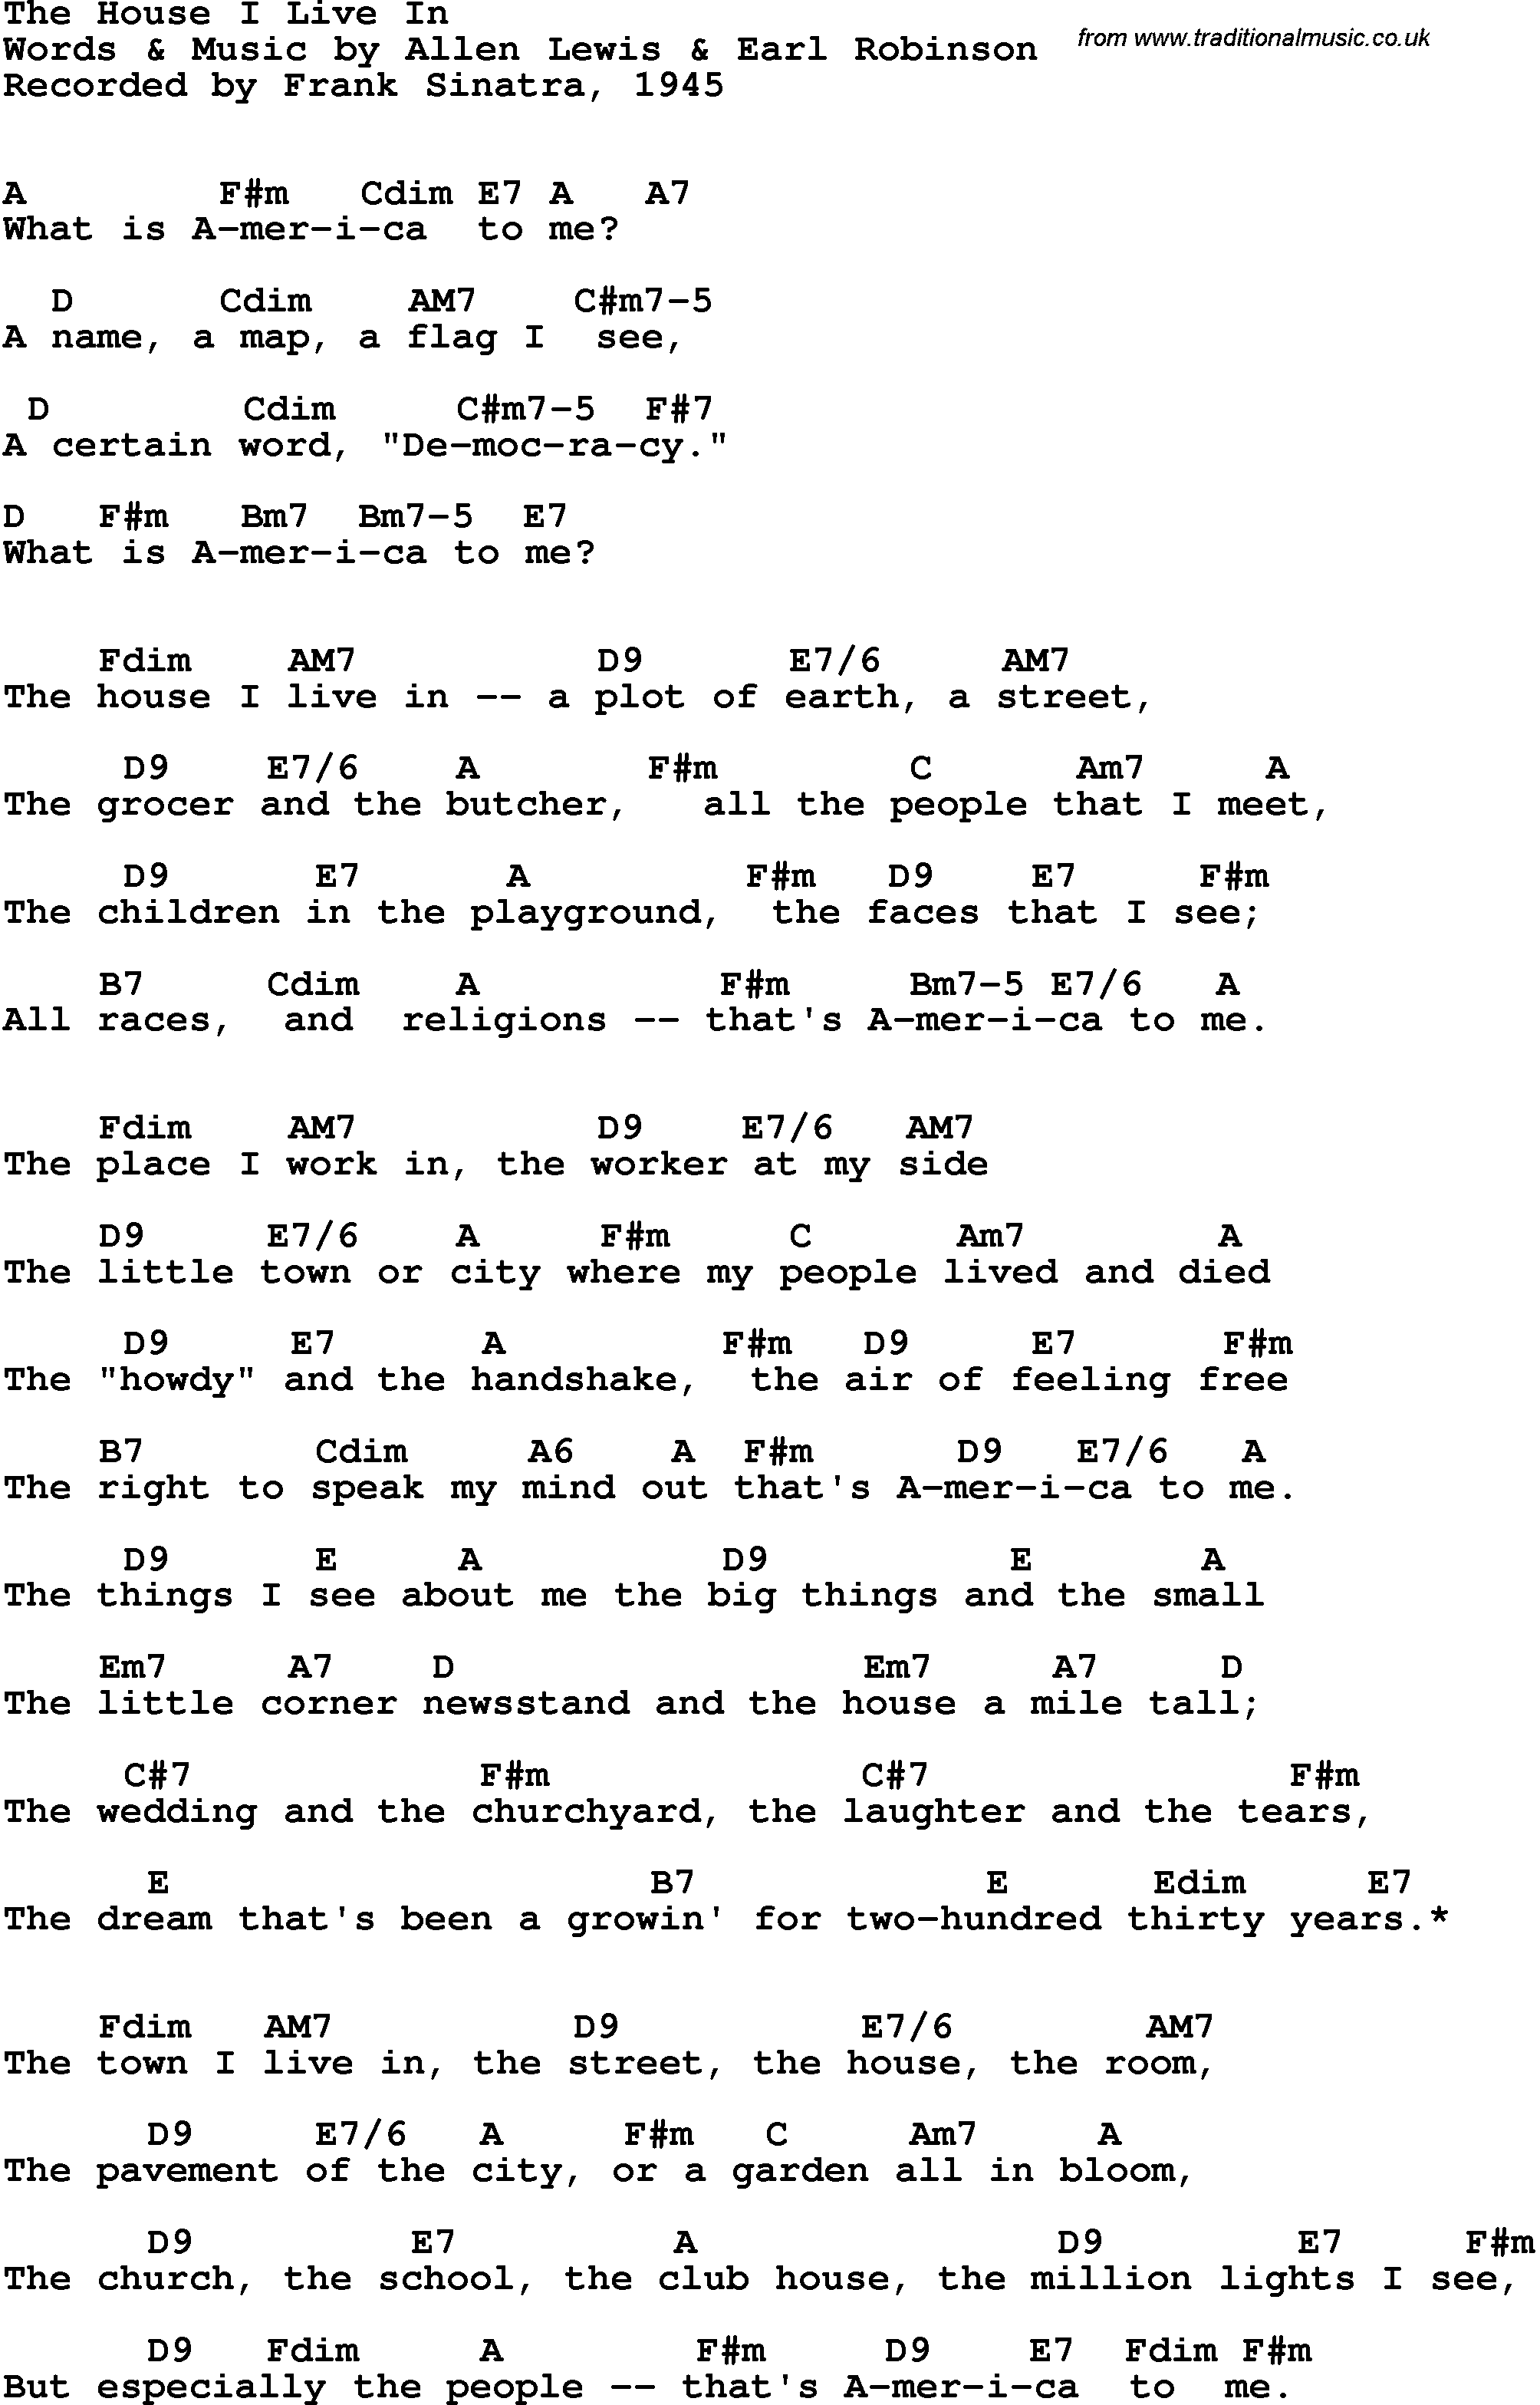 Song Lyrics with guitar chords for House I Live In, The - Frank Sinatra, 1945